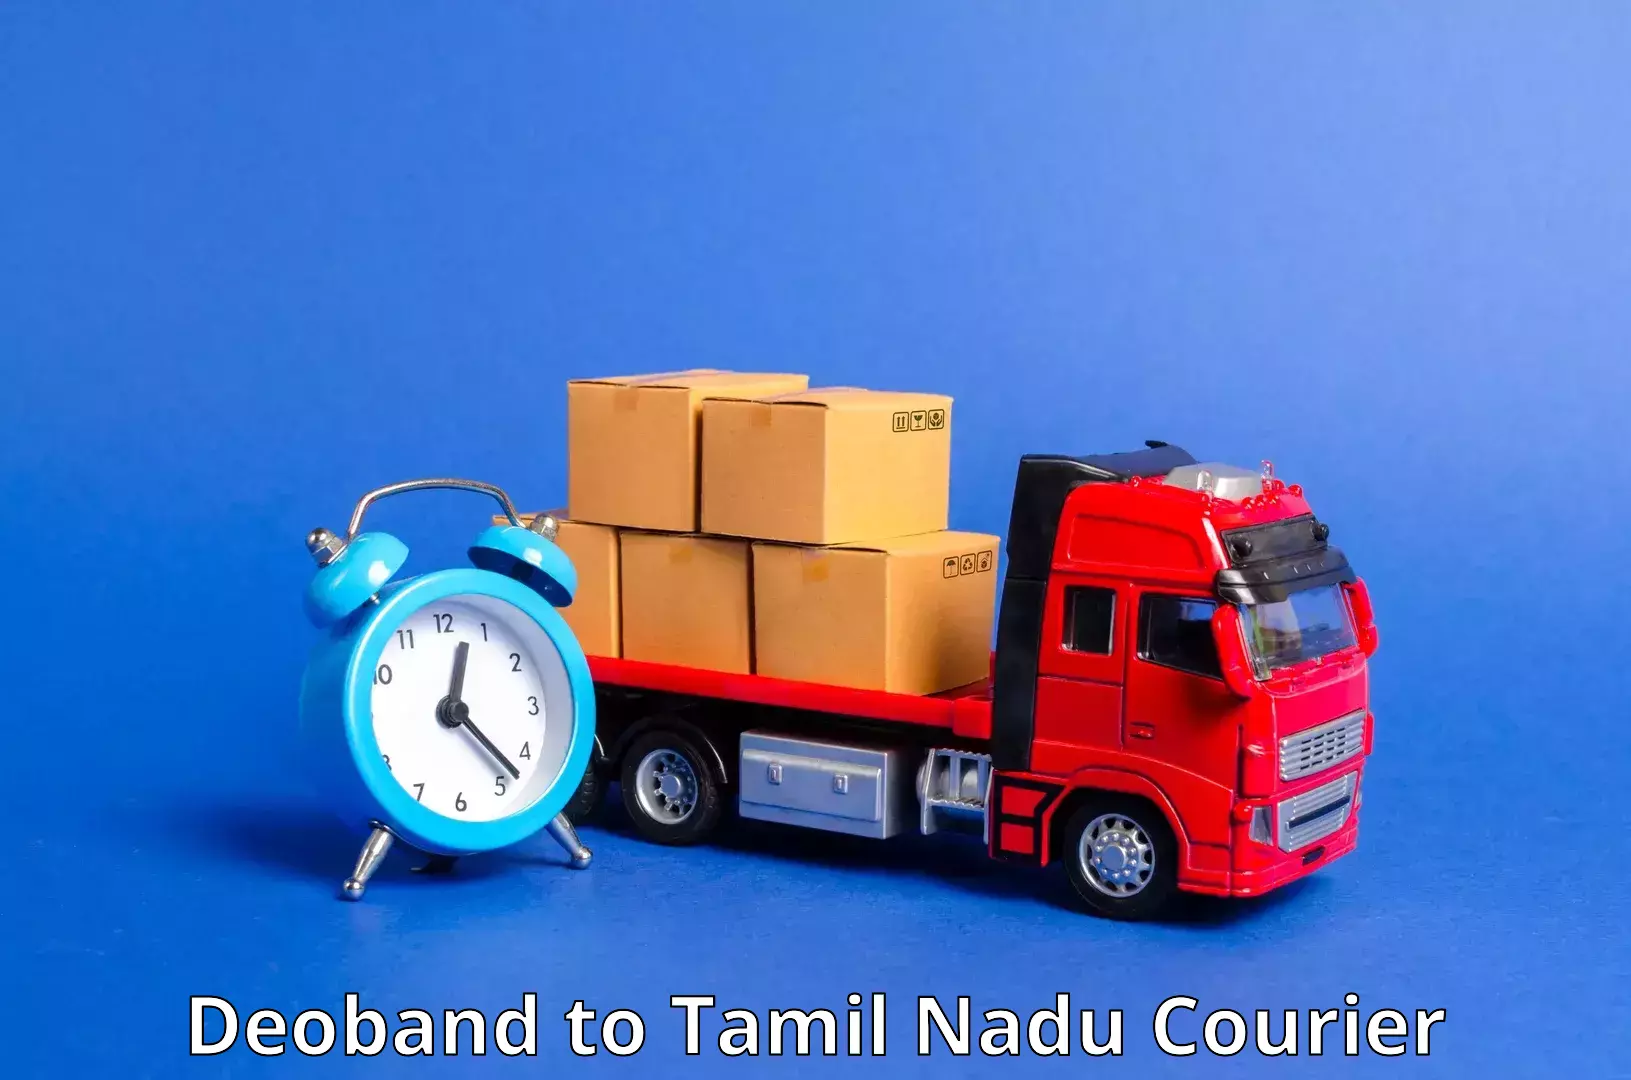 Cash on delivery service Deoband to Tamil Nadu